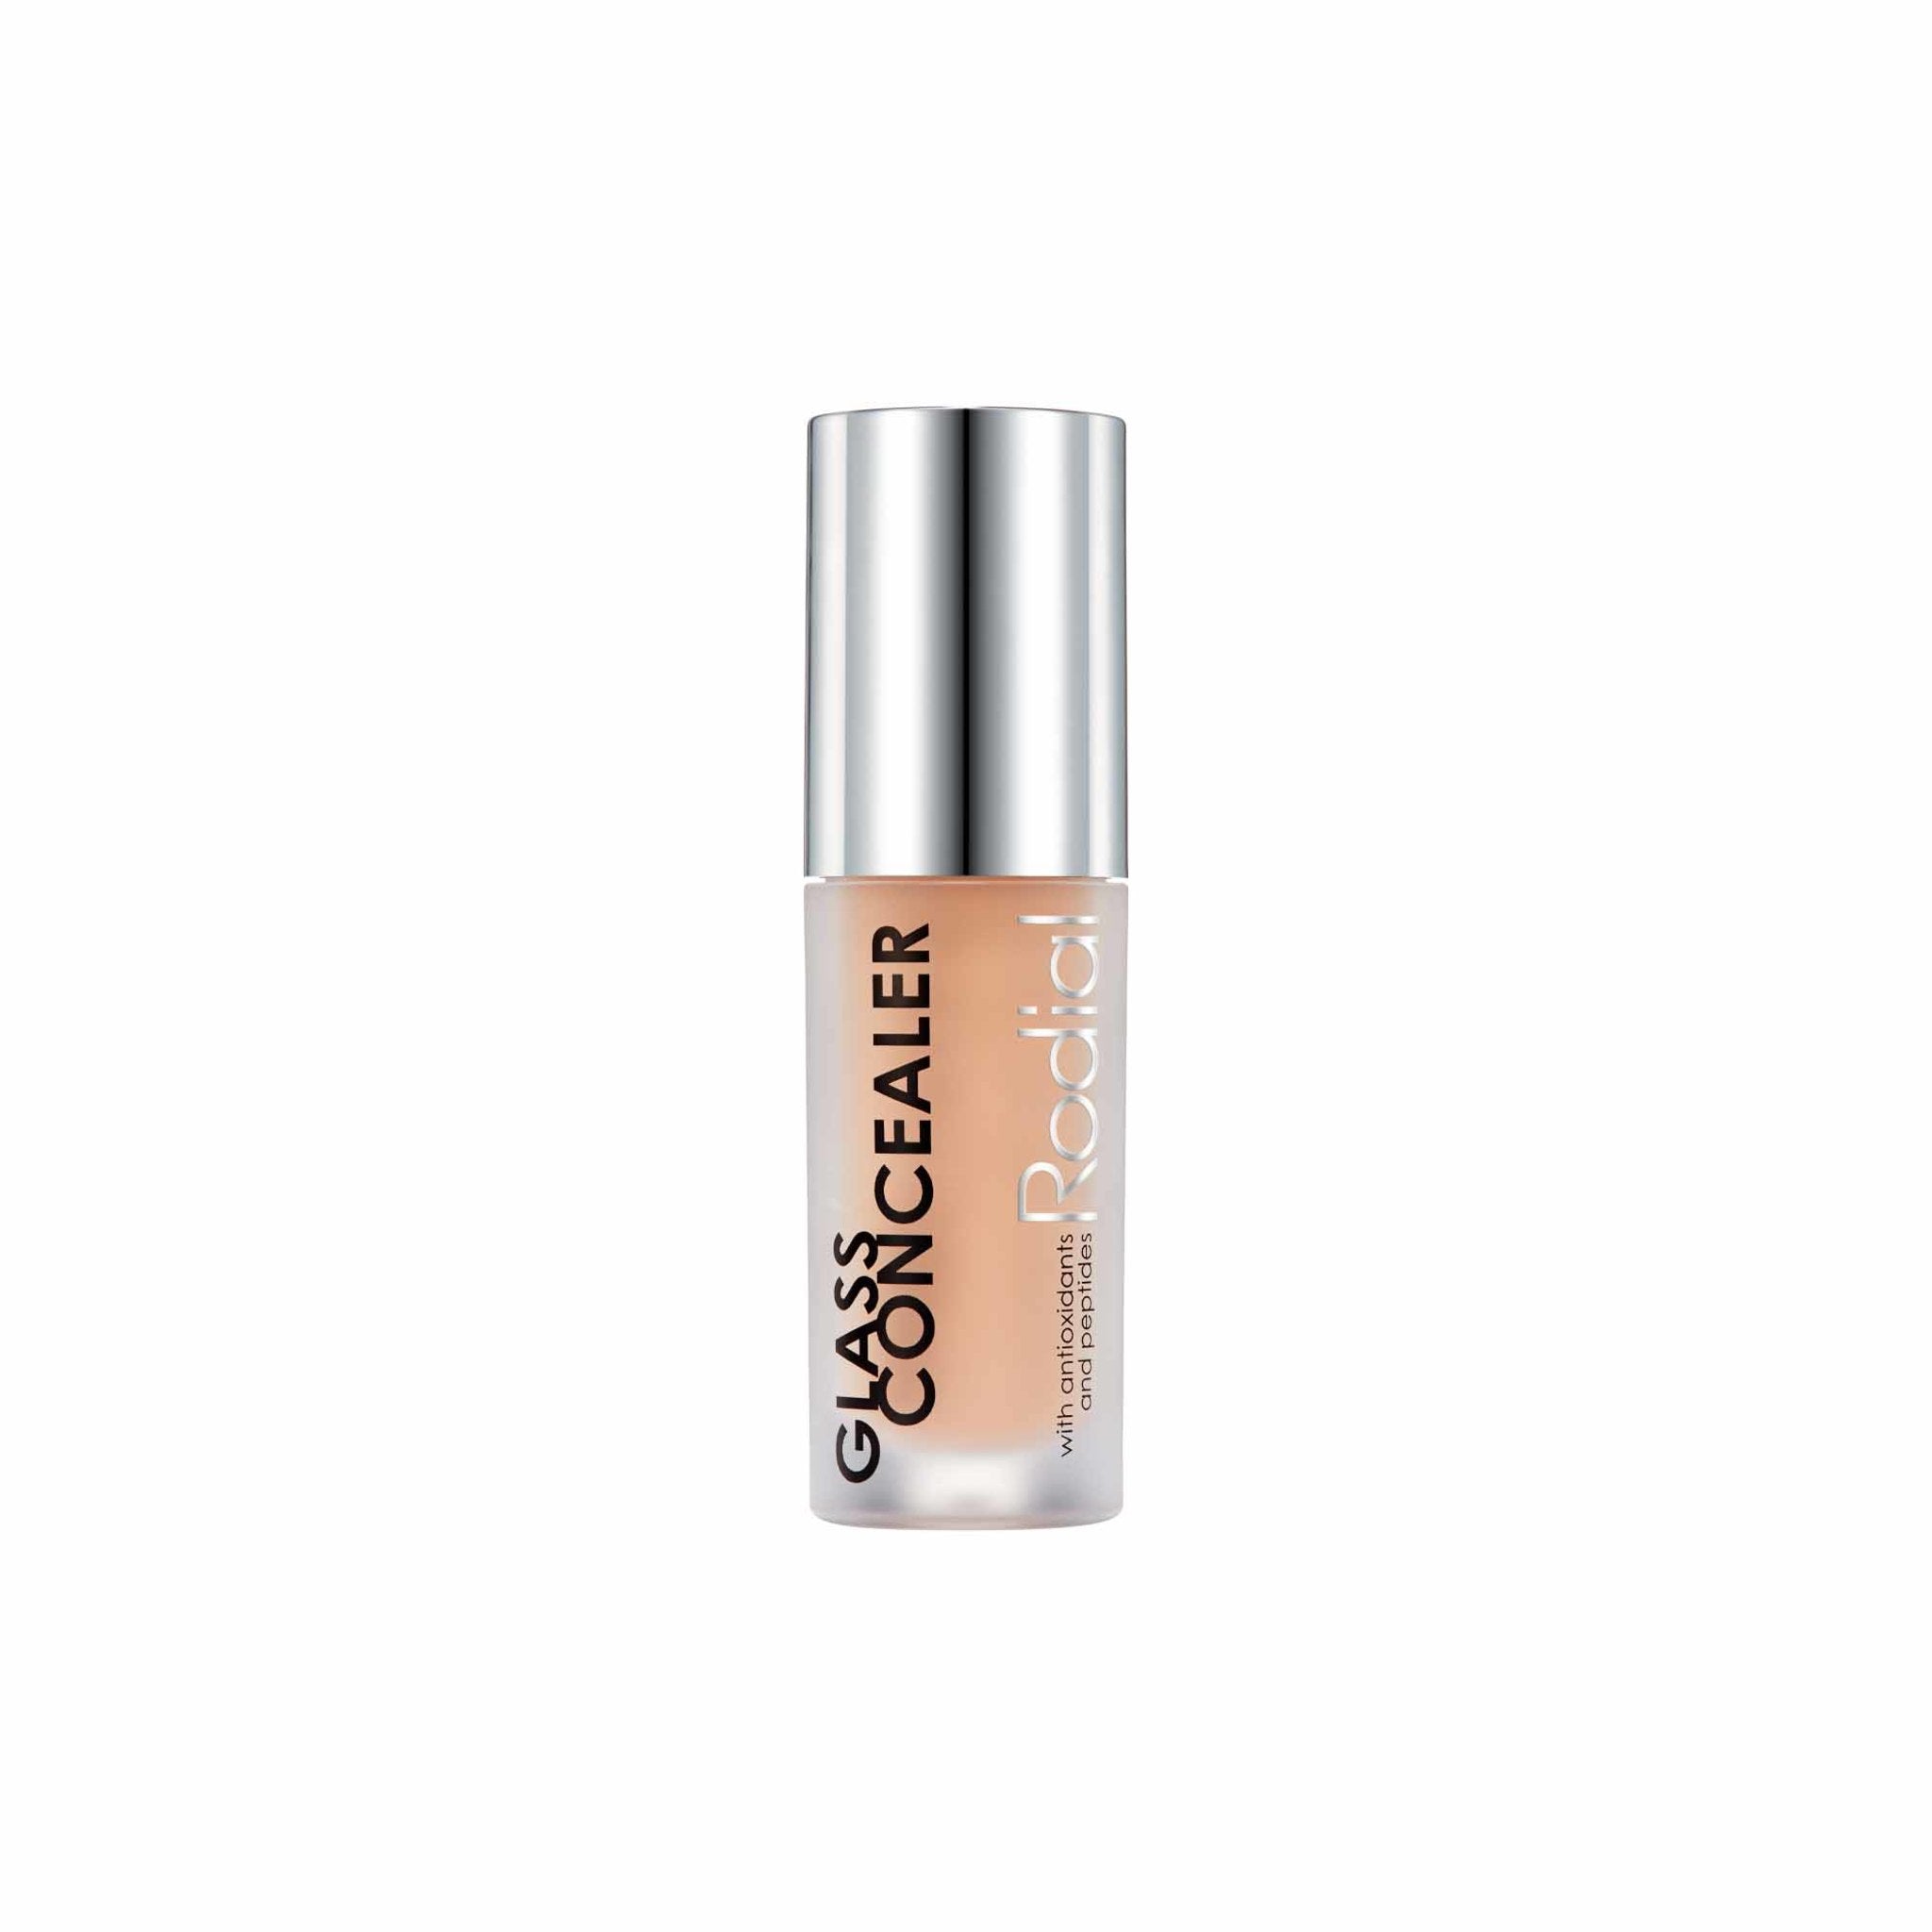 Rodial Glass Conceal Color/Shade variant: Shade 10 main image. This product is for light neutral blue complexions